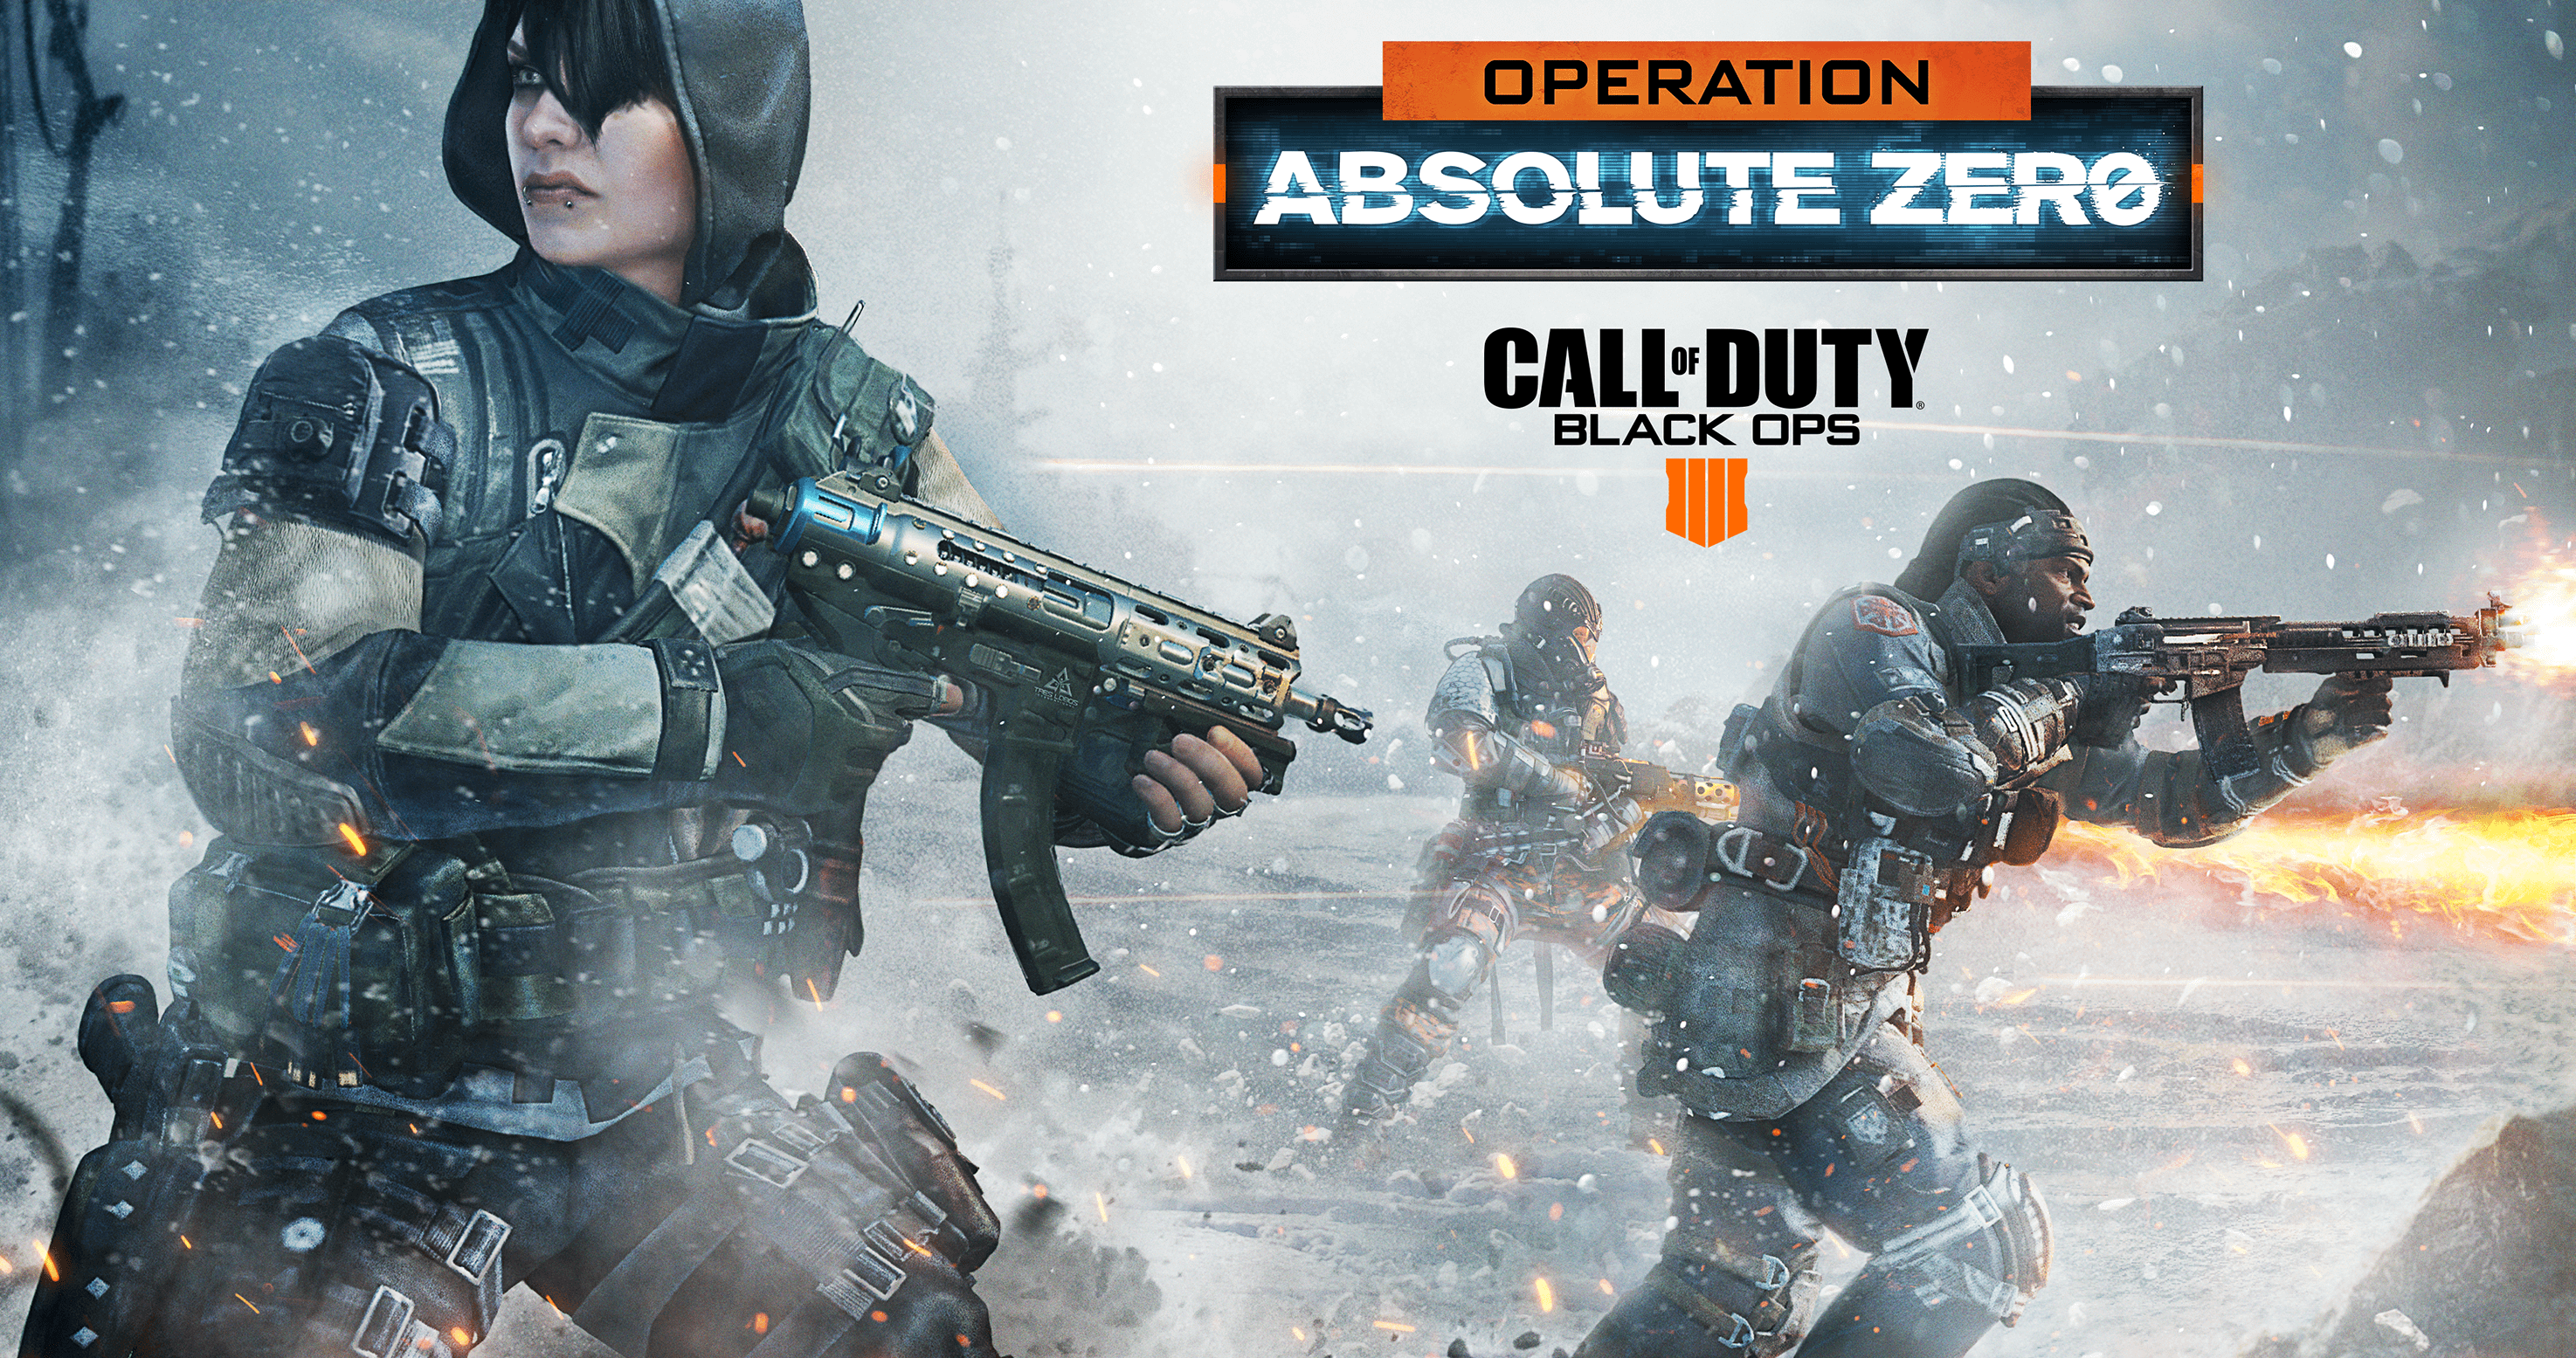 Call Of Duty: Black Ops 4 - Operation Absolute Zero (Activision/Treyarch)